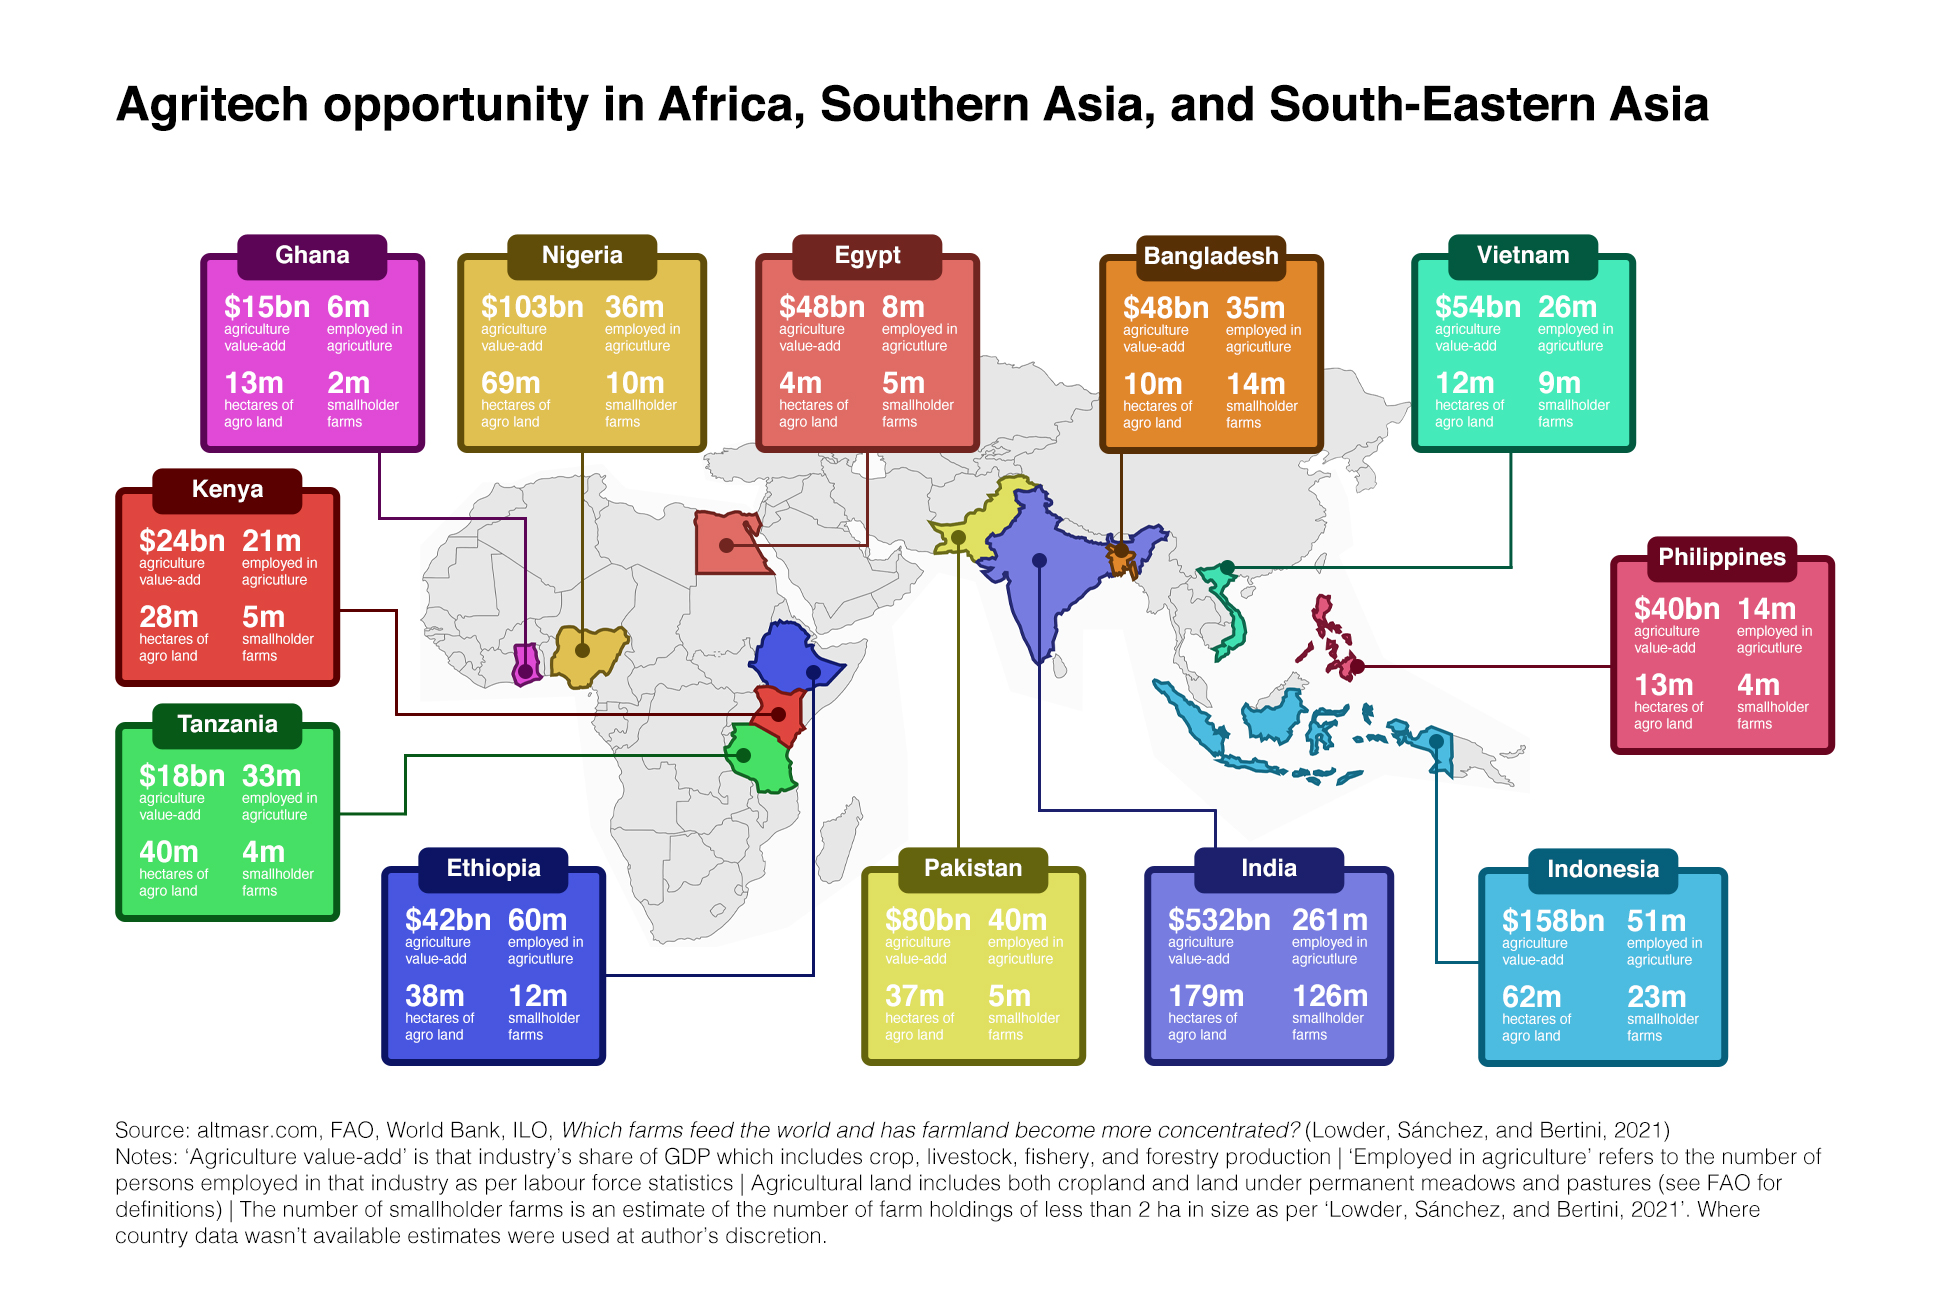 Map of Africa and Asia highlighting countries with potential for agritech investment